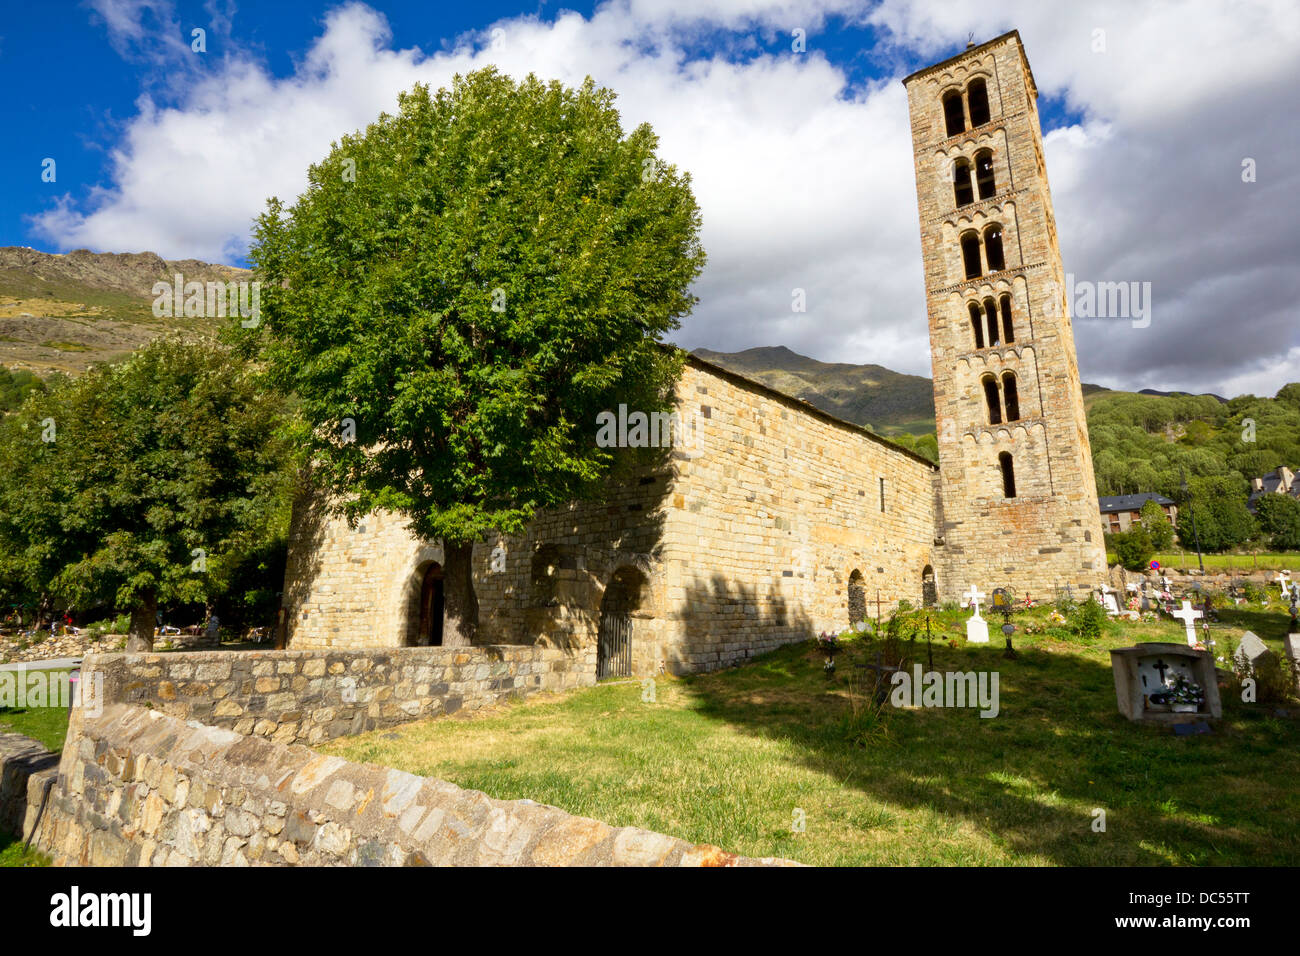 Church of Sant Climent de Taüll is style of romanesque architecture in the province of Lleida, in Catalonia,Spain. Stock Photo